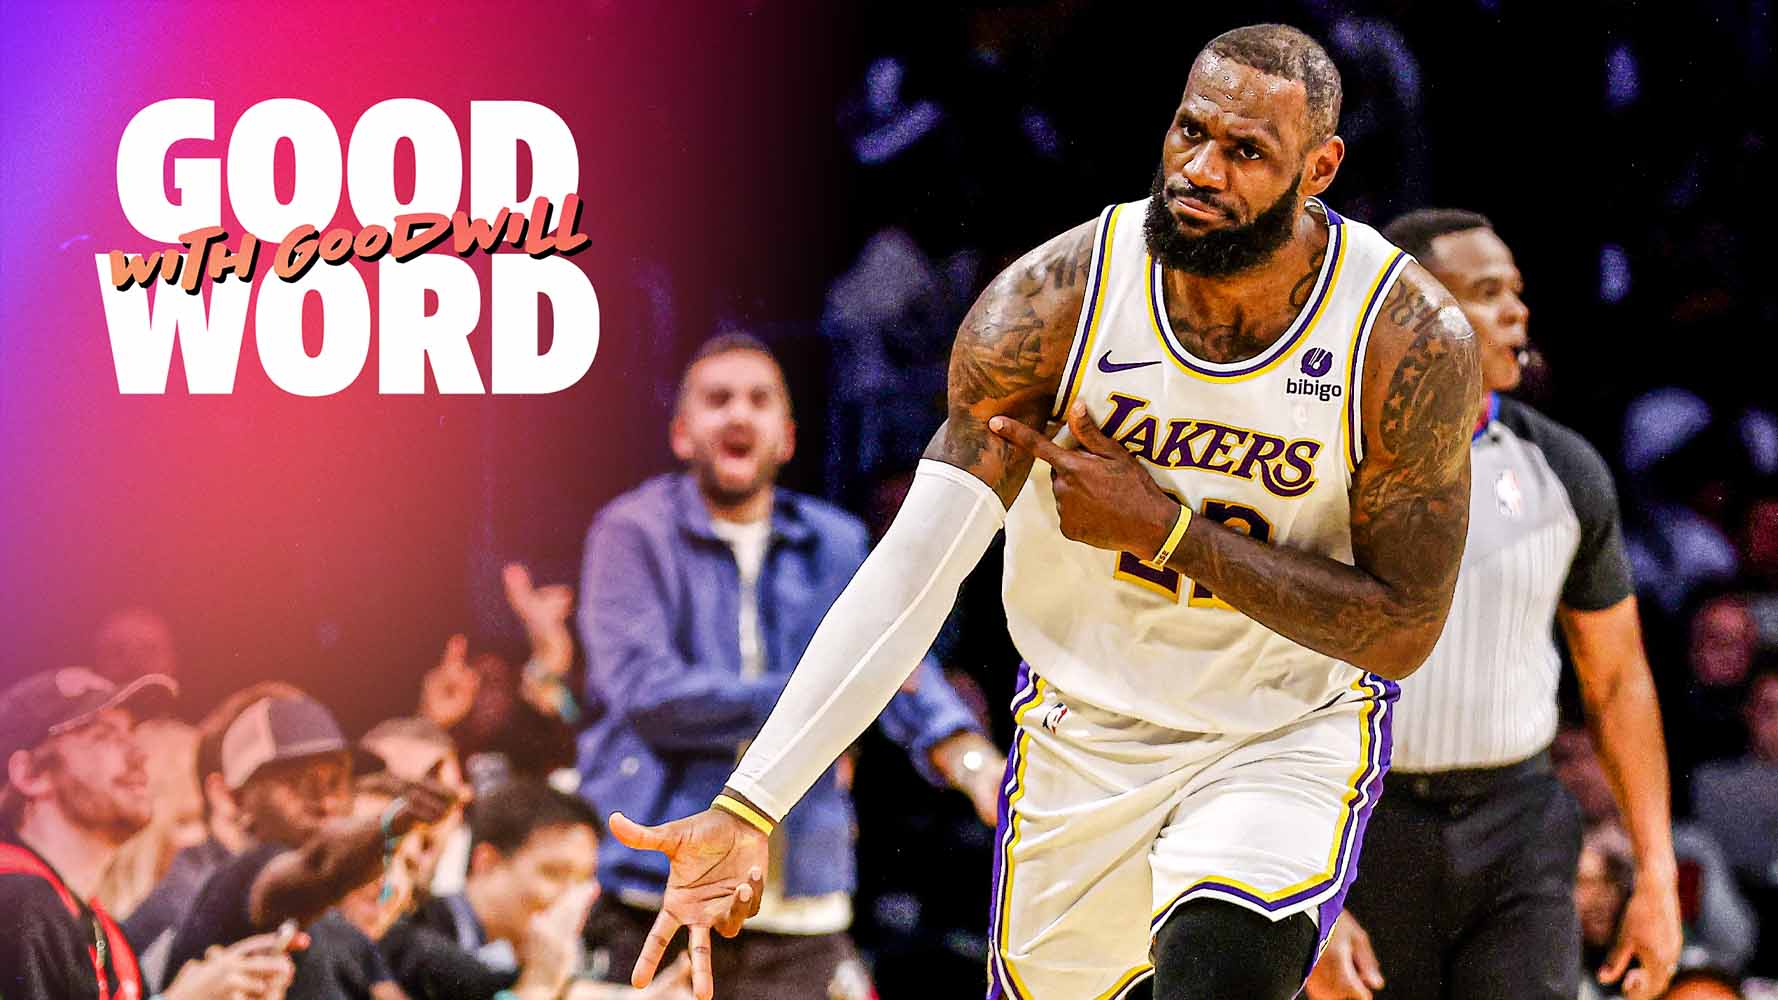 LeBron James is defying history with his play in his 21st season | Good Word with Goodwill